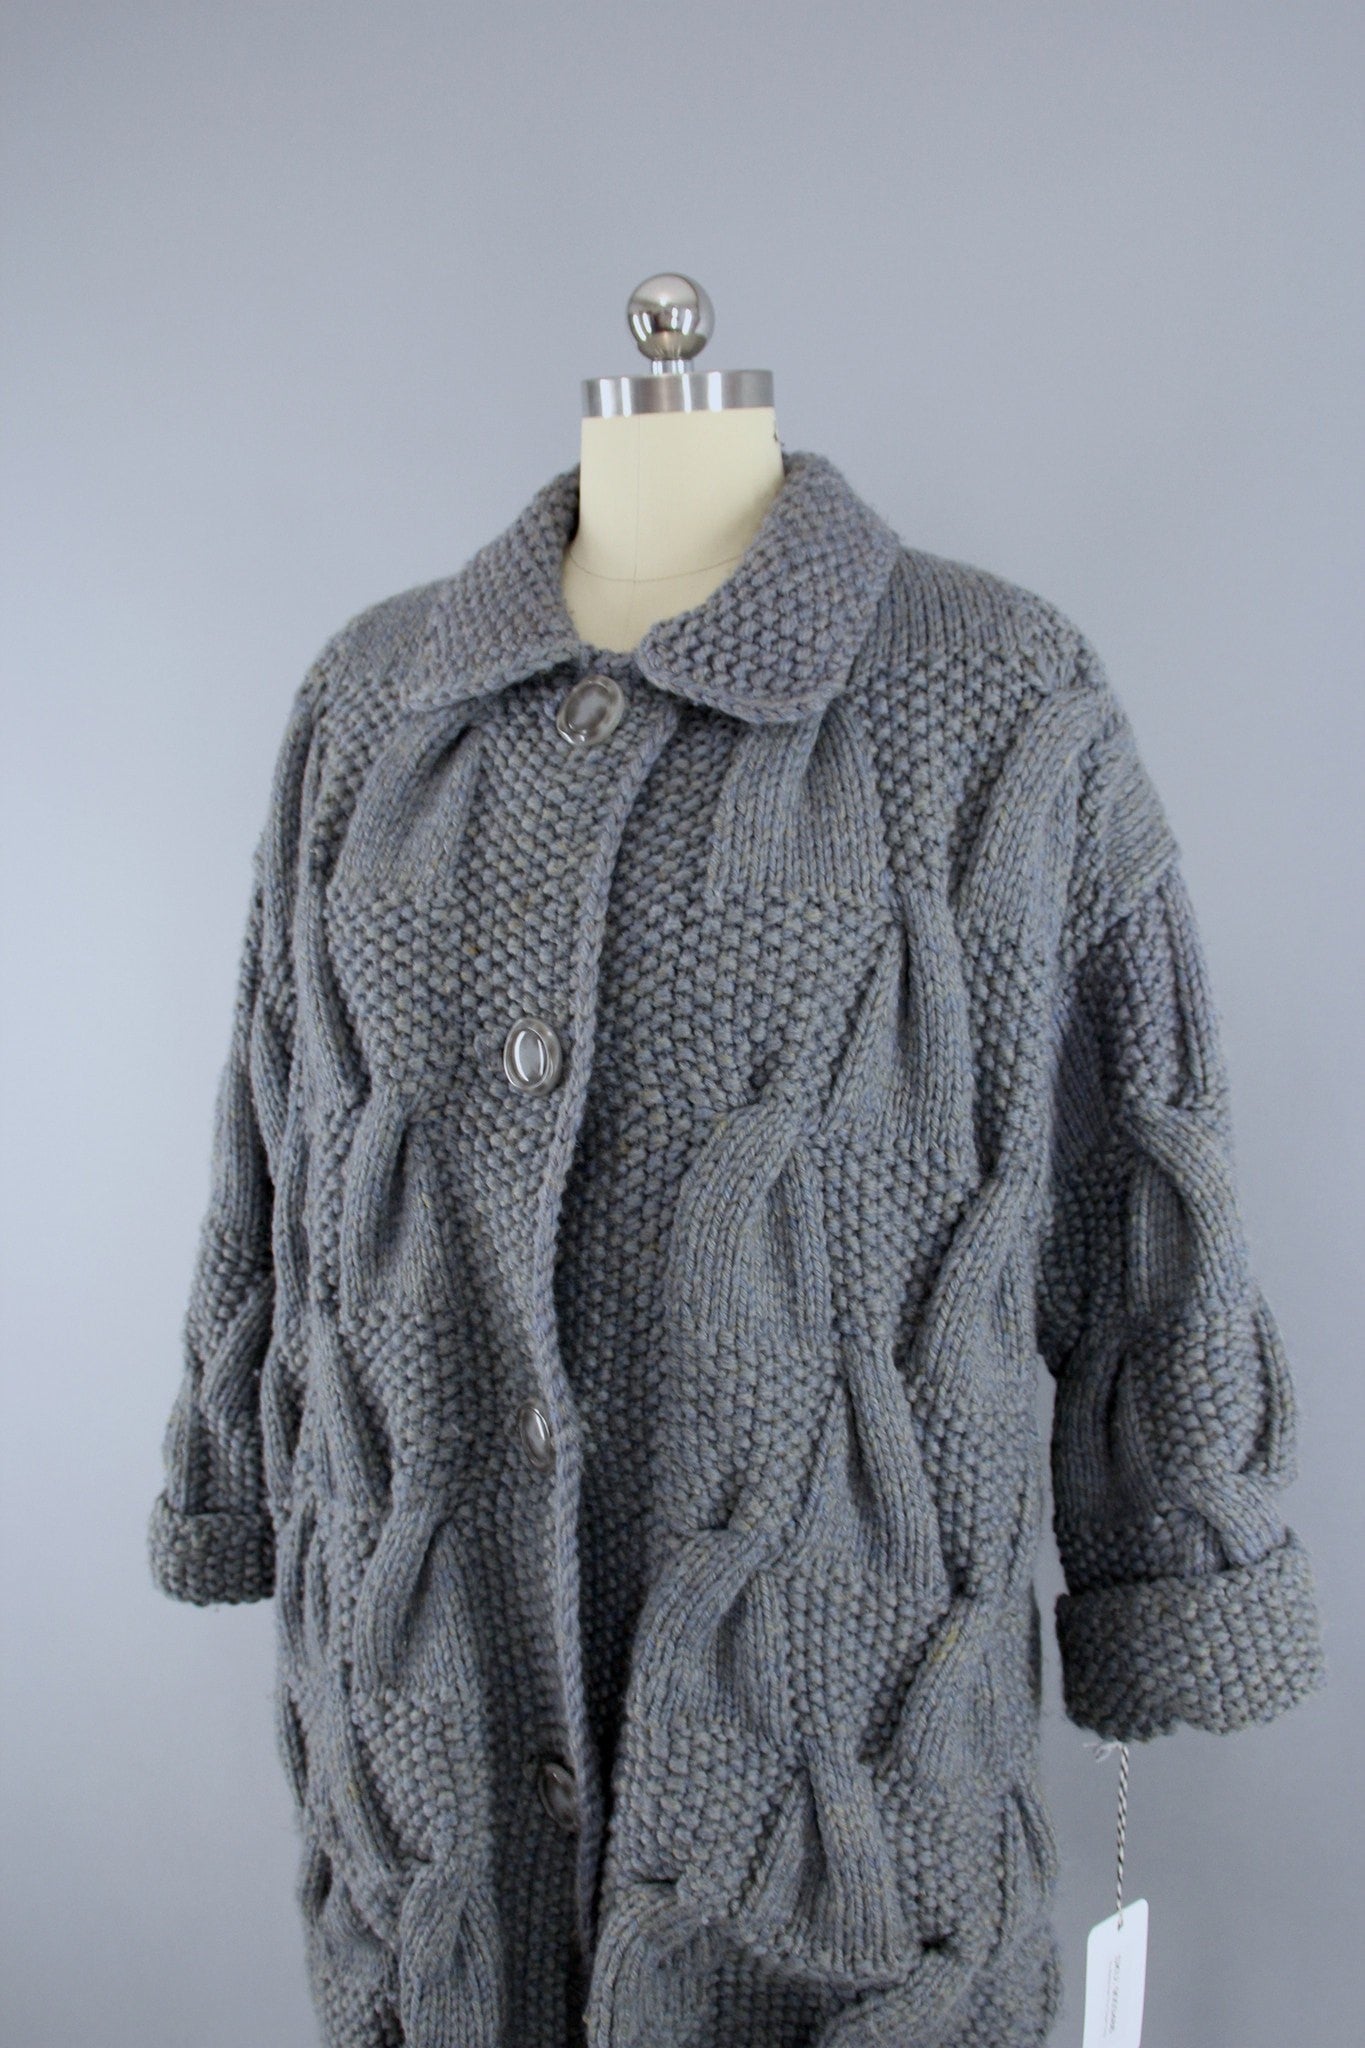 1960s Vintage Grey Wool Cardigan Sweater Knitted Coat - ThisBlueBird